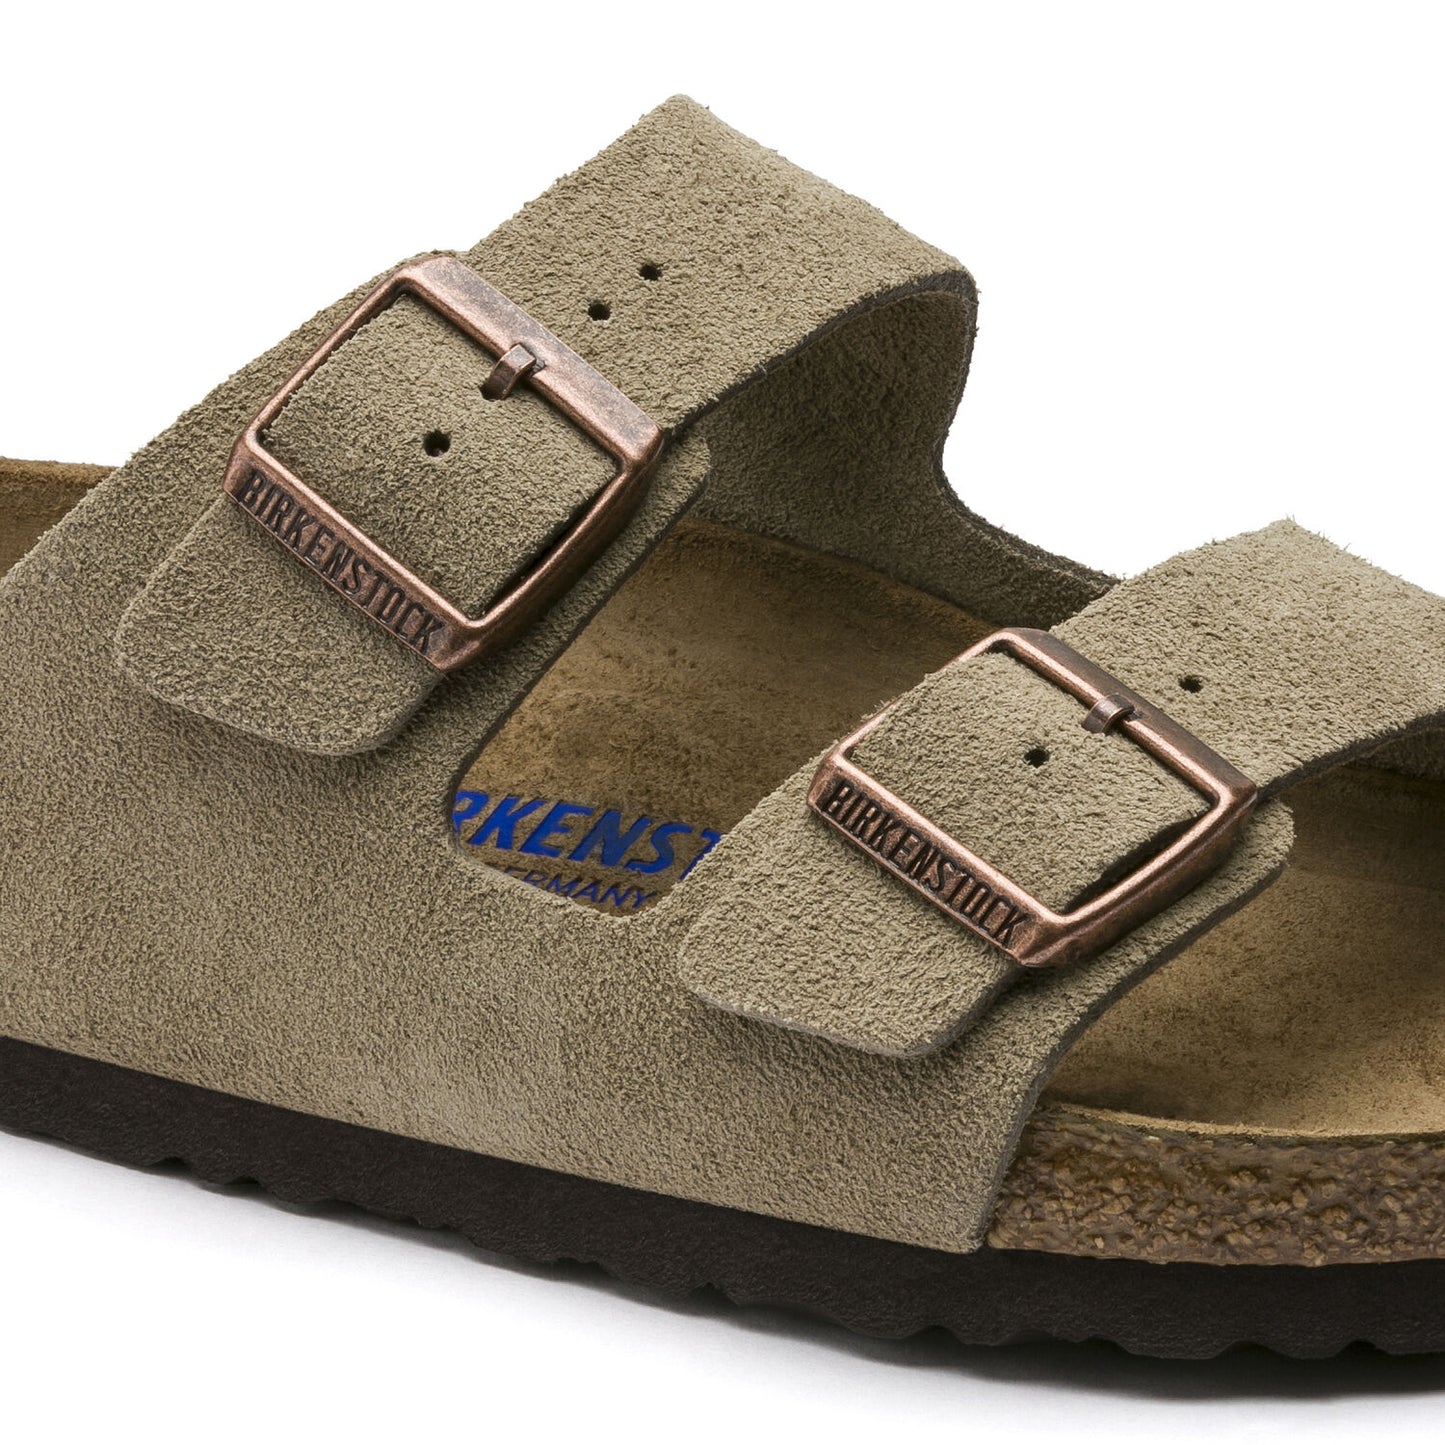 Arizona Soft Footbed Taupe Suede Leather Sandal - Taupe- Regular/Wide